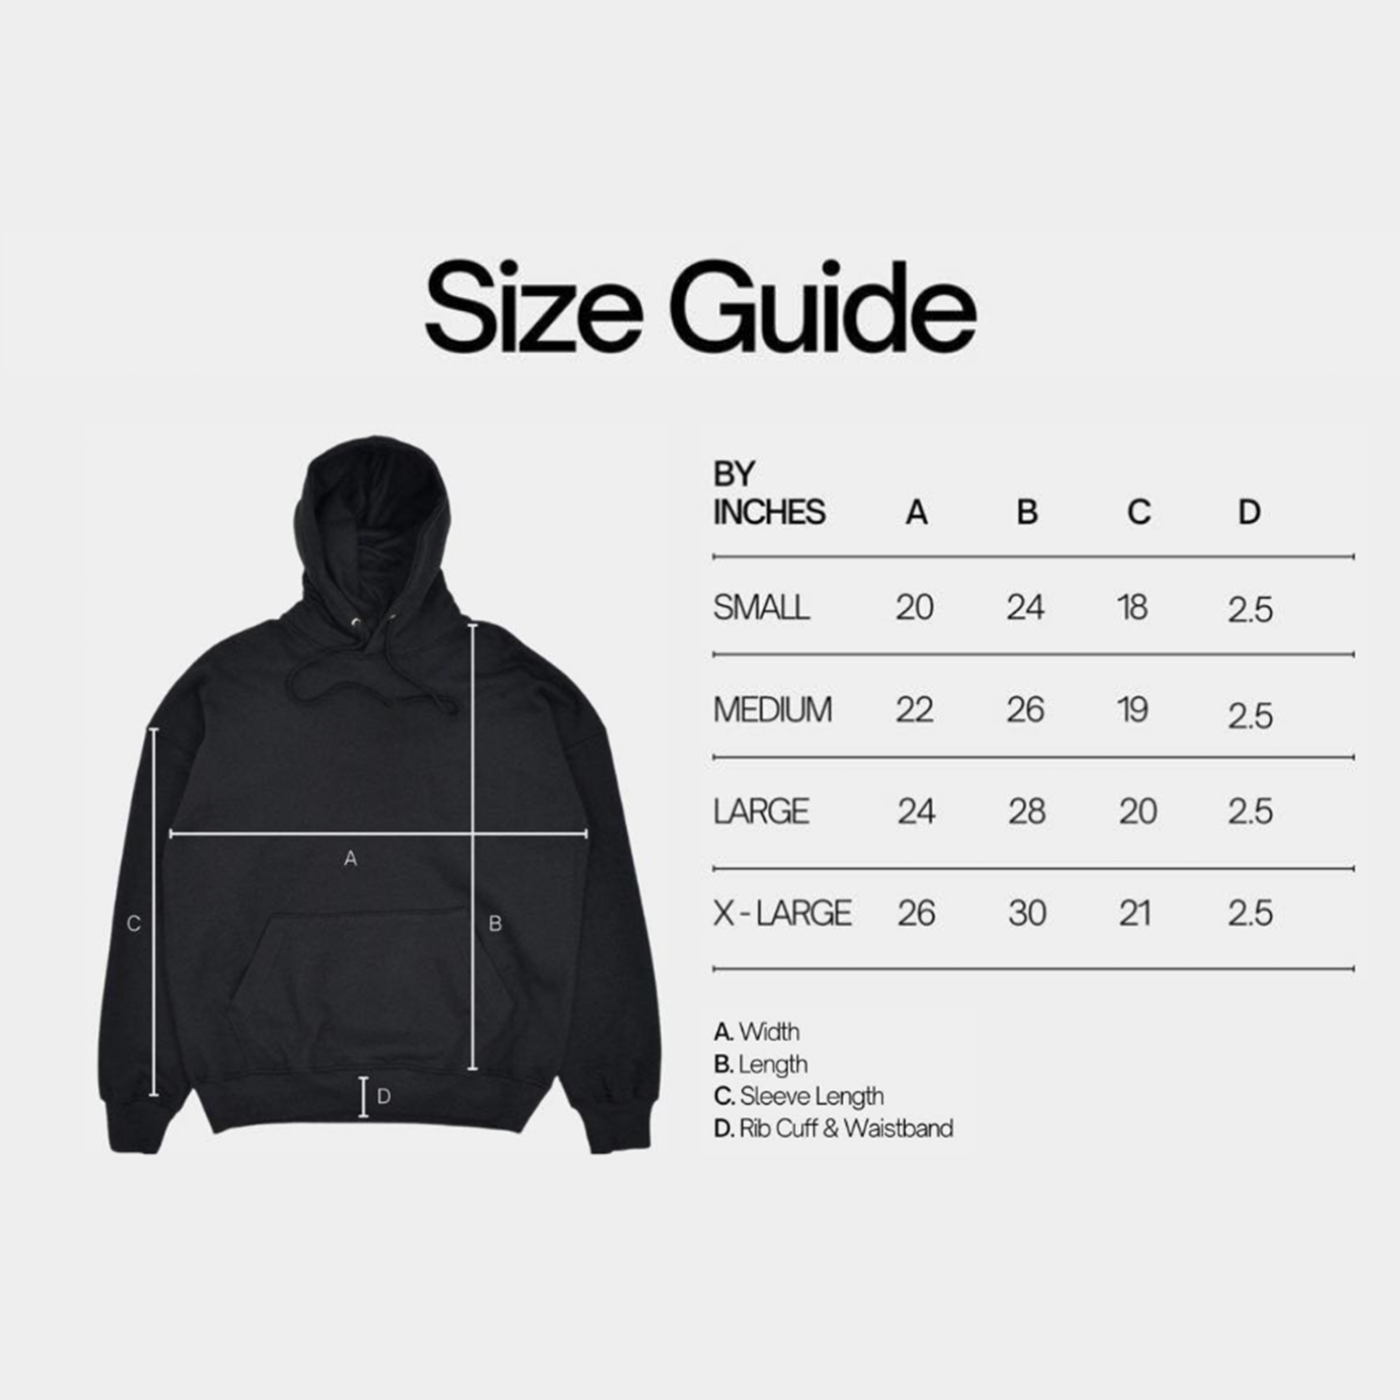 Hoodie Size Guide